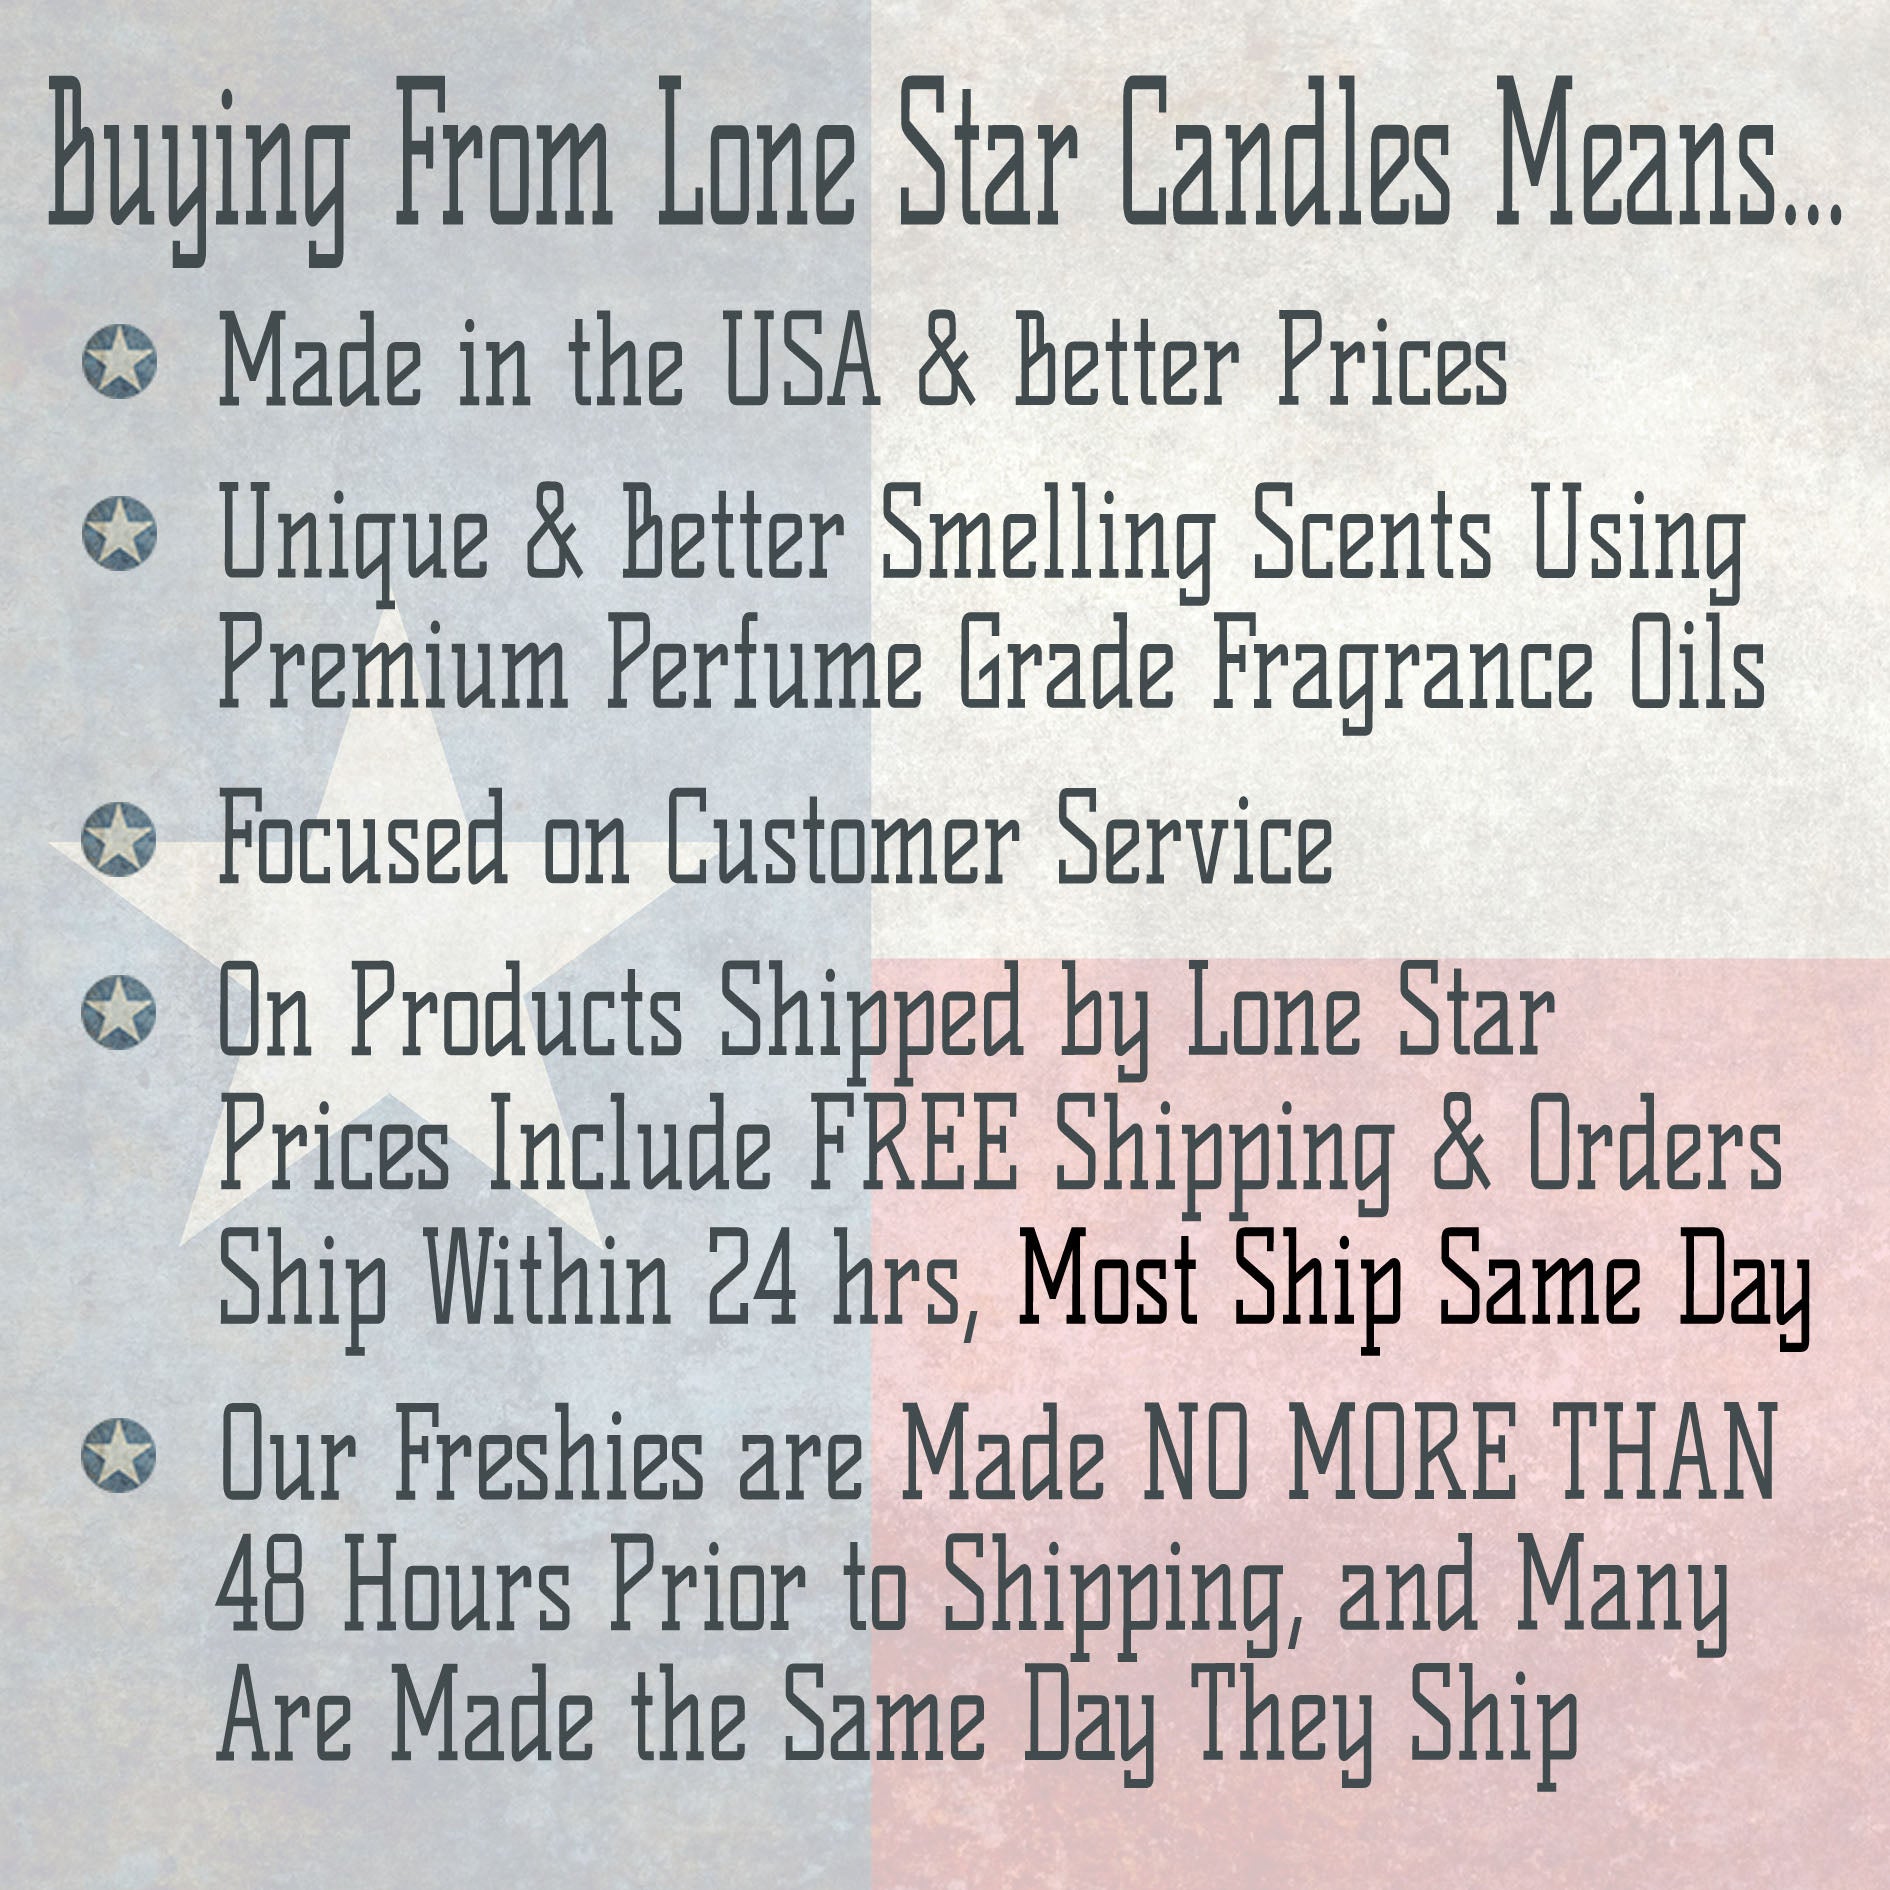 Strawberry Leather, Lone Star Candles & More's Premium Strongly Scented Freshies, Genuine Leather Aroma with Sweet & Juicy Strawberries, Car & Air Freshener, USA Made in Texas, TX Cowhide 1-Pack